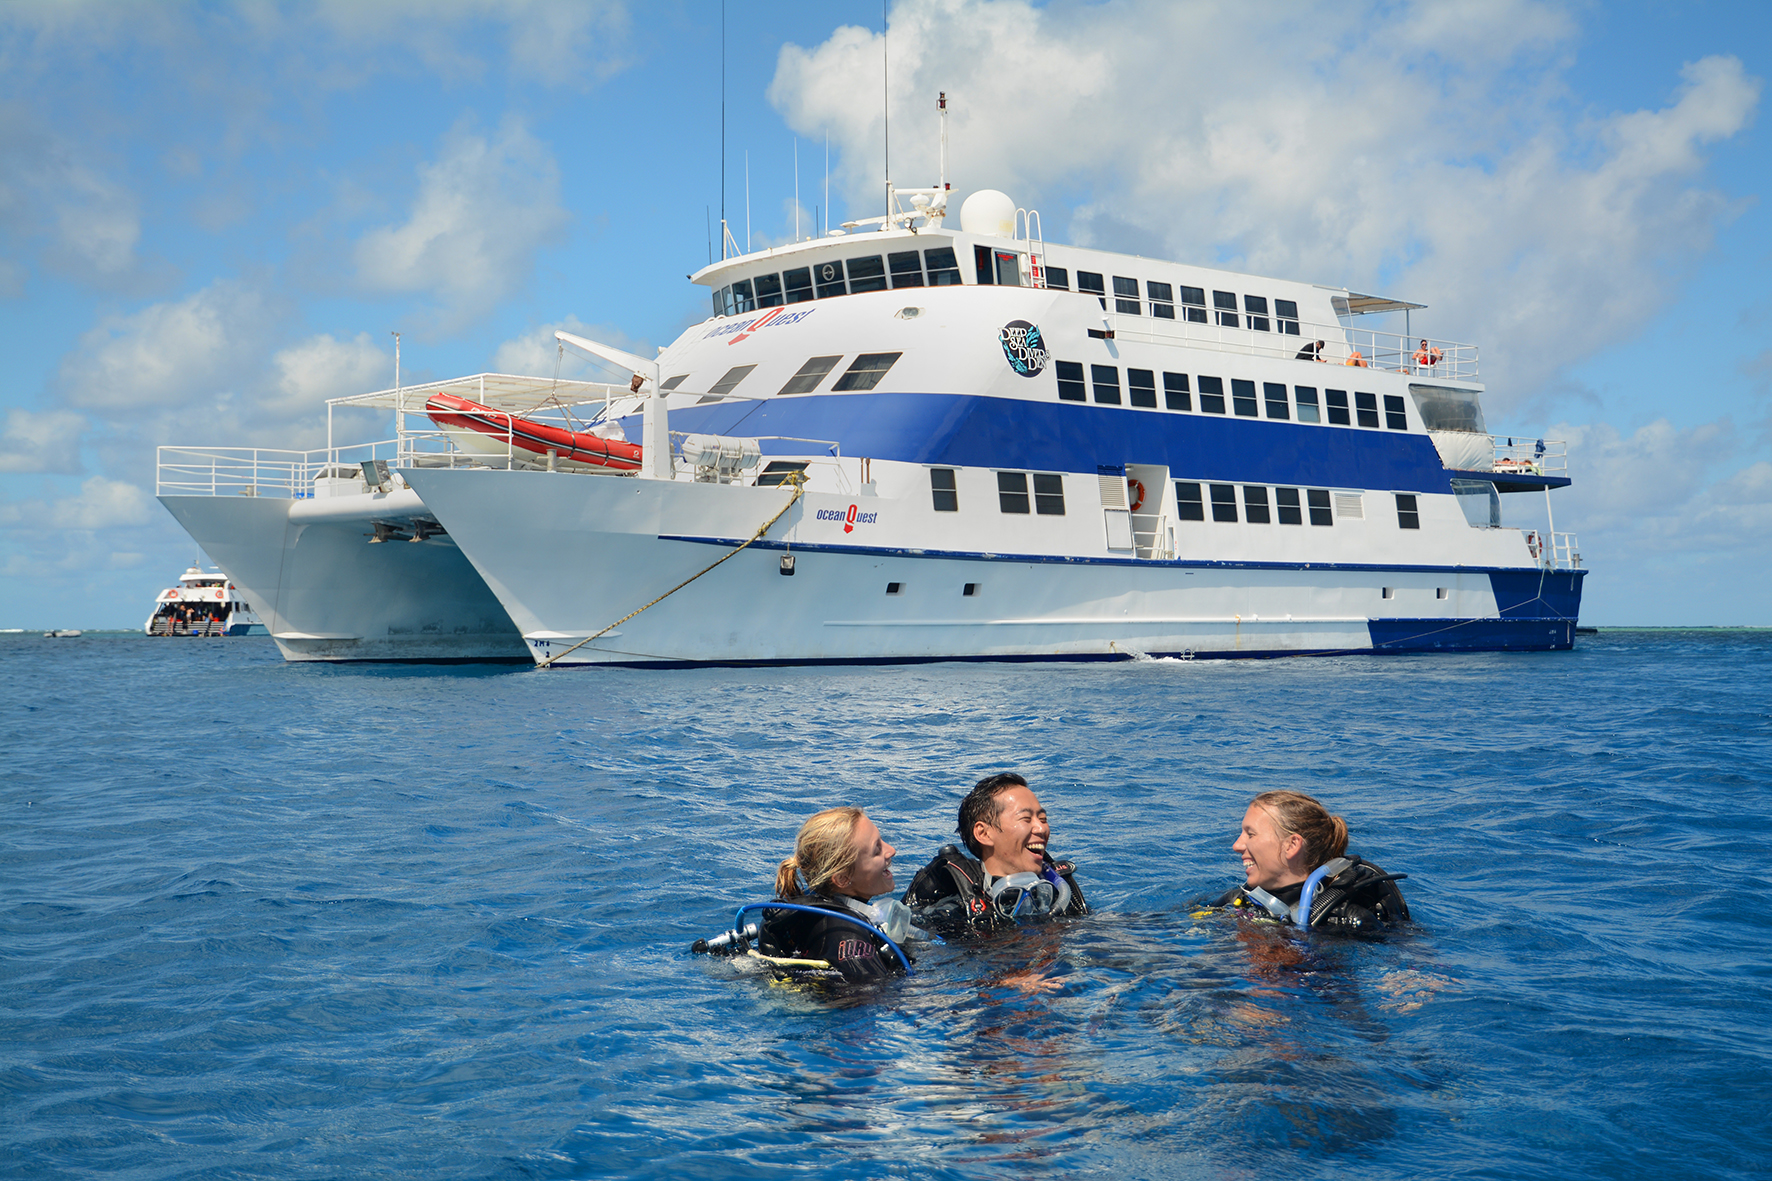 OceanQuest Liveaboard Trips to the Outer Great Barrier Reef from Cairns Our Liveaboard OceanQuest caters to Snorkelers, Certified and Introductory Divers